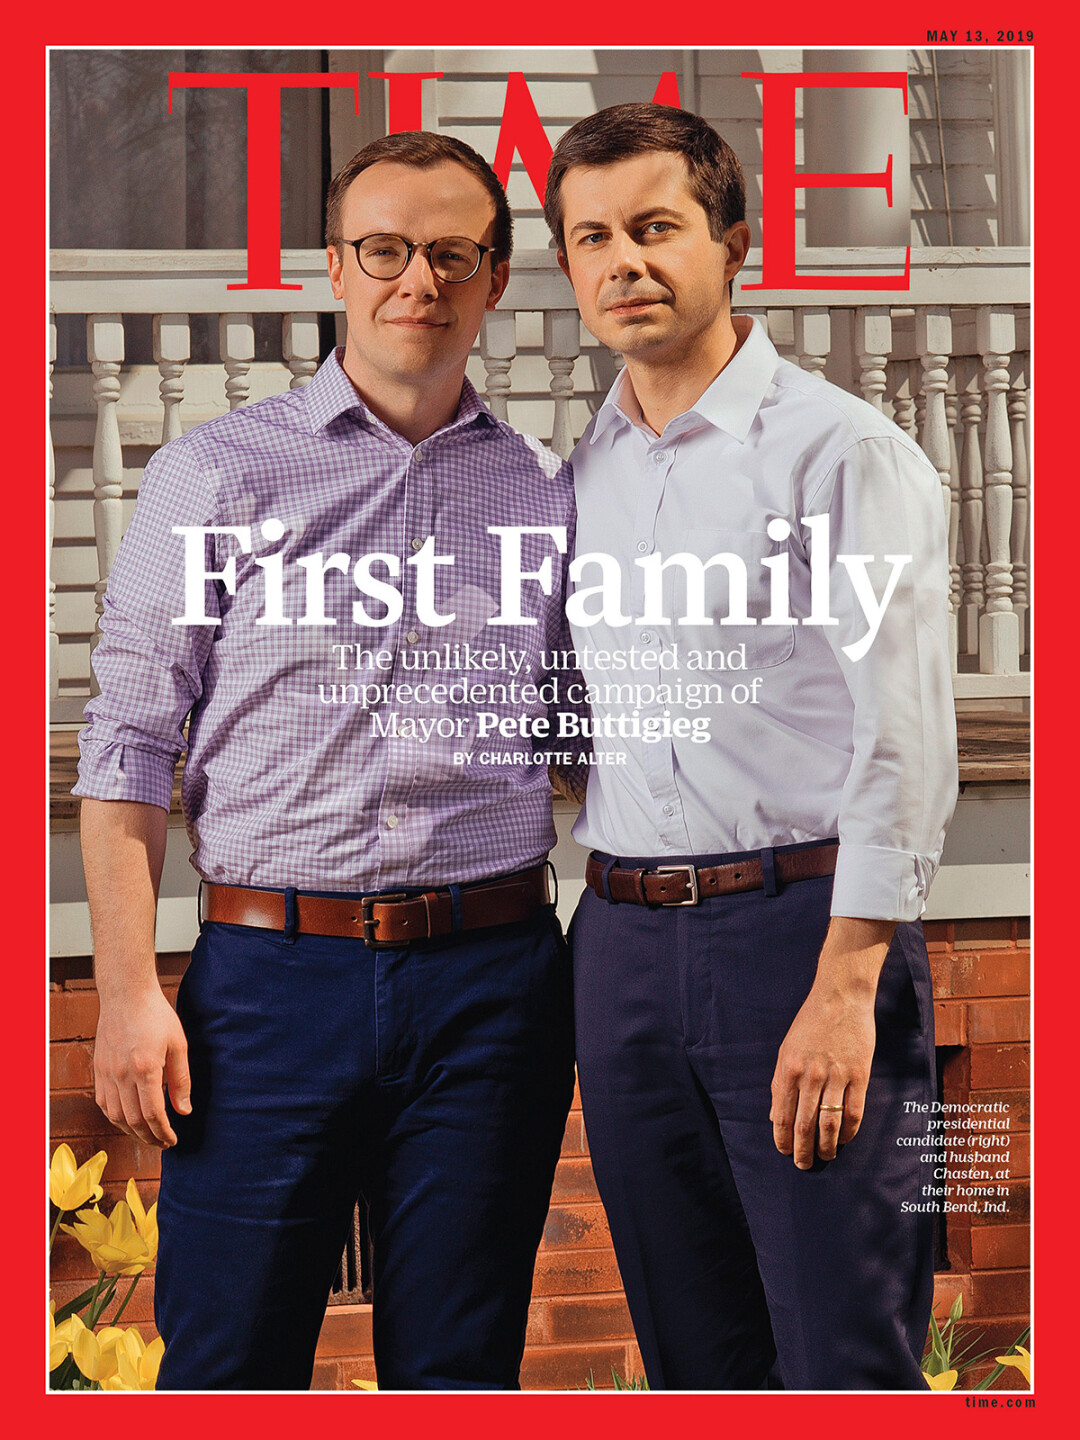 Chasten Buttigieg (left) on the cover of TIME Magazine (May 13) with husband and Democratic presidential hopeful Pete Buttigieg.